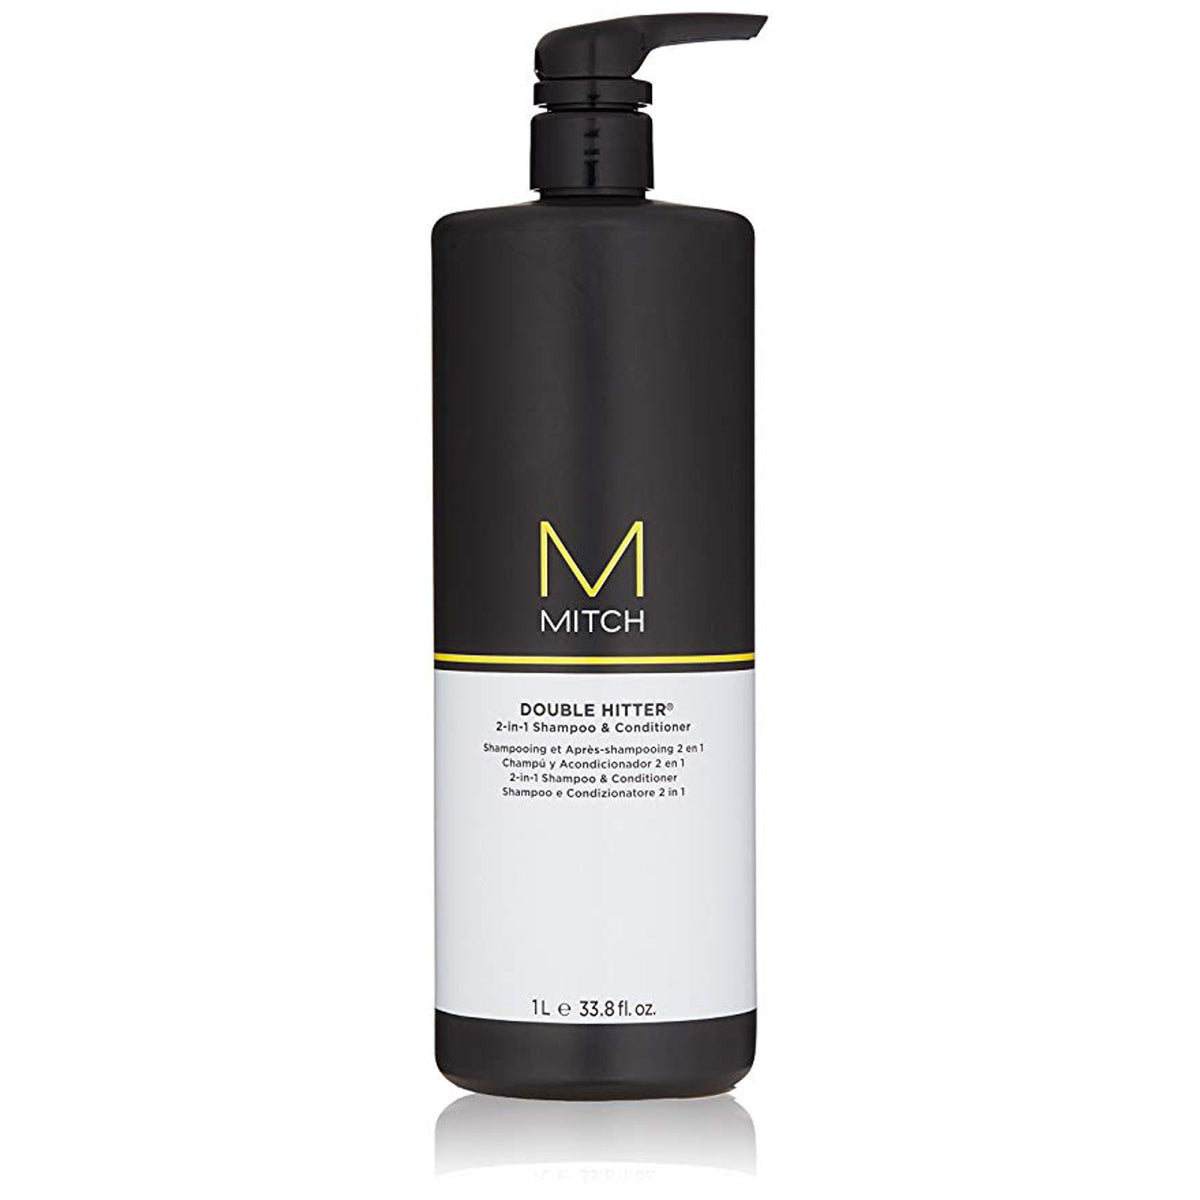 Mitch Care Double Hitter 2-in-1 Shampoo + Conditioner - 1L - by Paul Mitchell |ProCare Outlet|